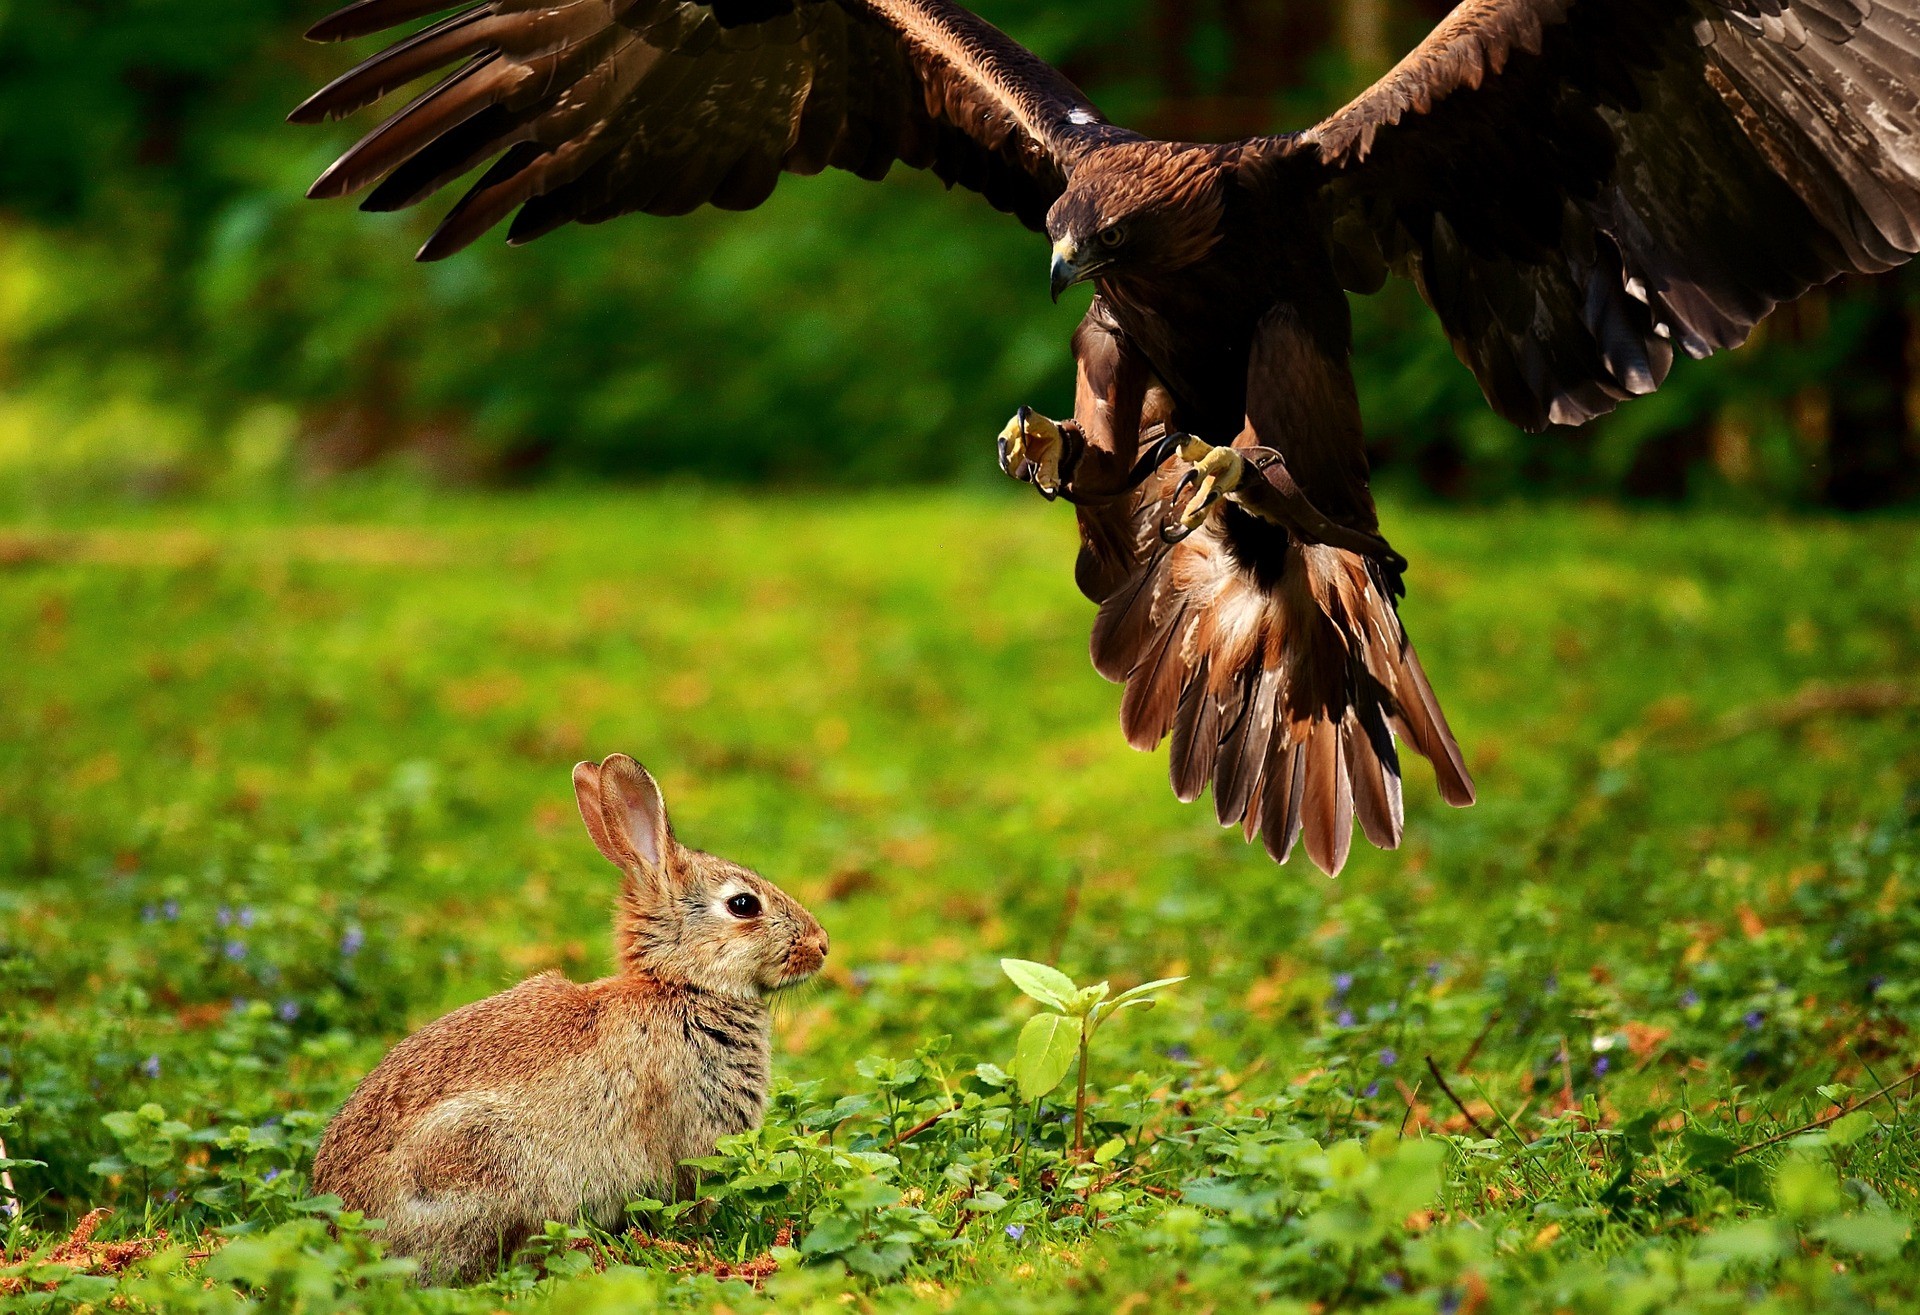 Eagle And Rabbit